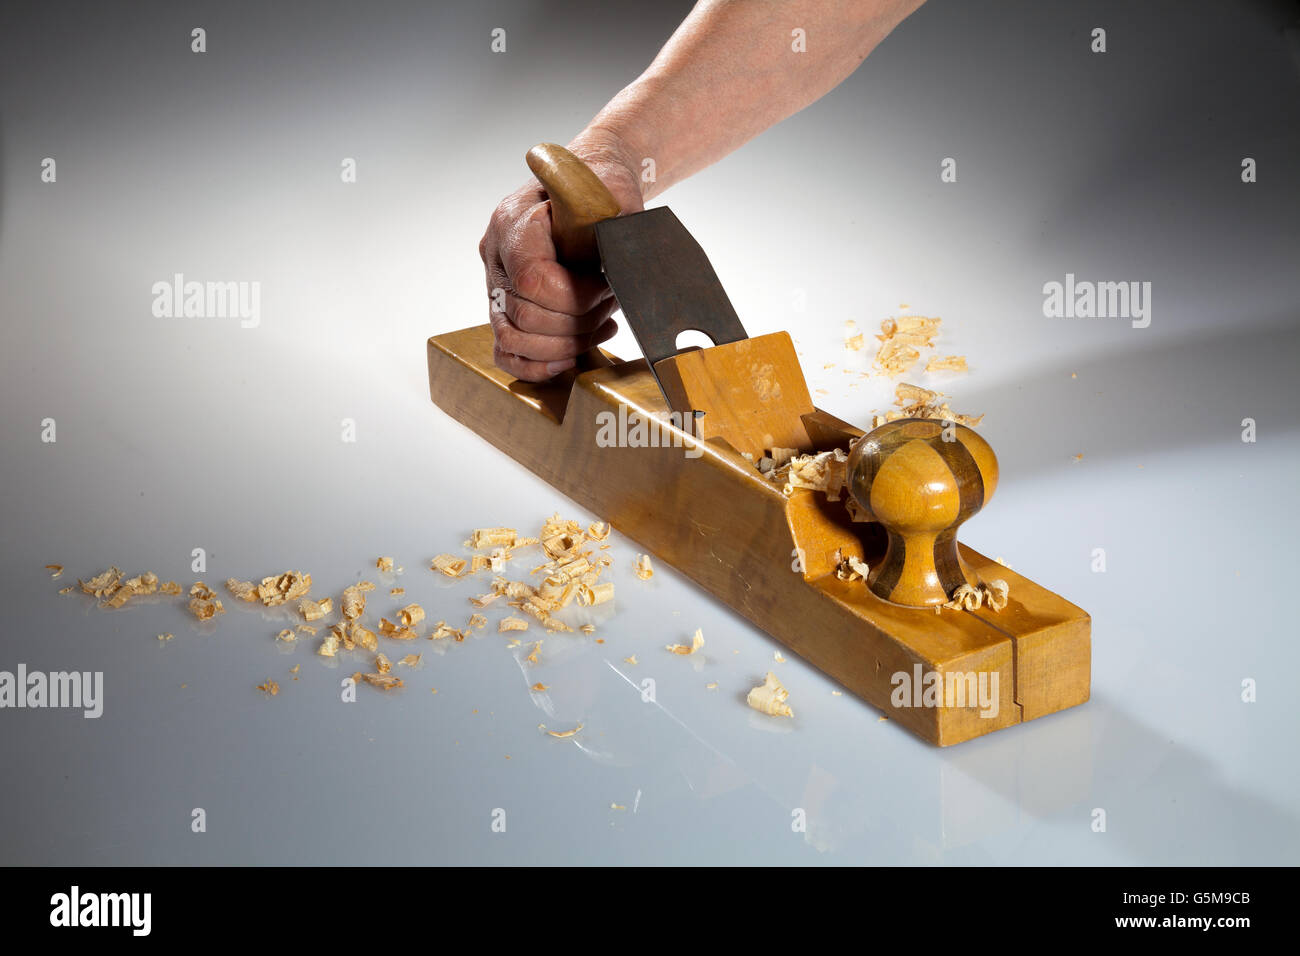 Hand holding wooden hand planer Stock Photo